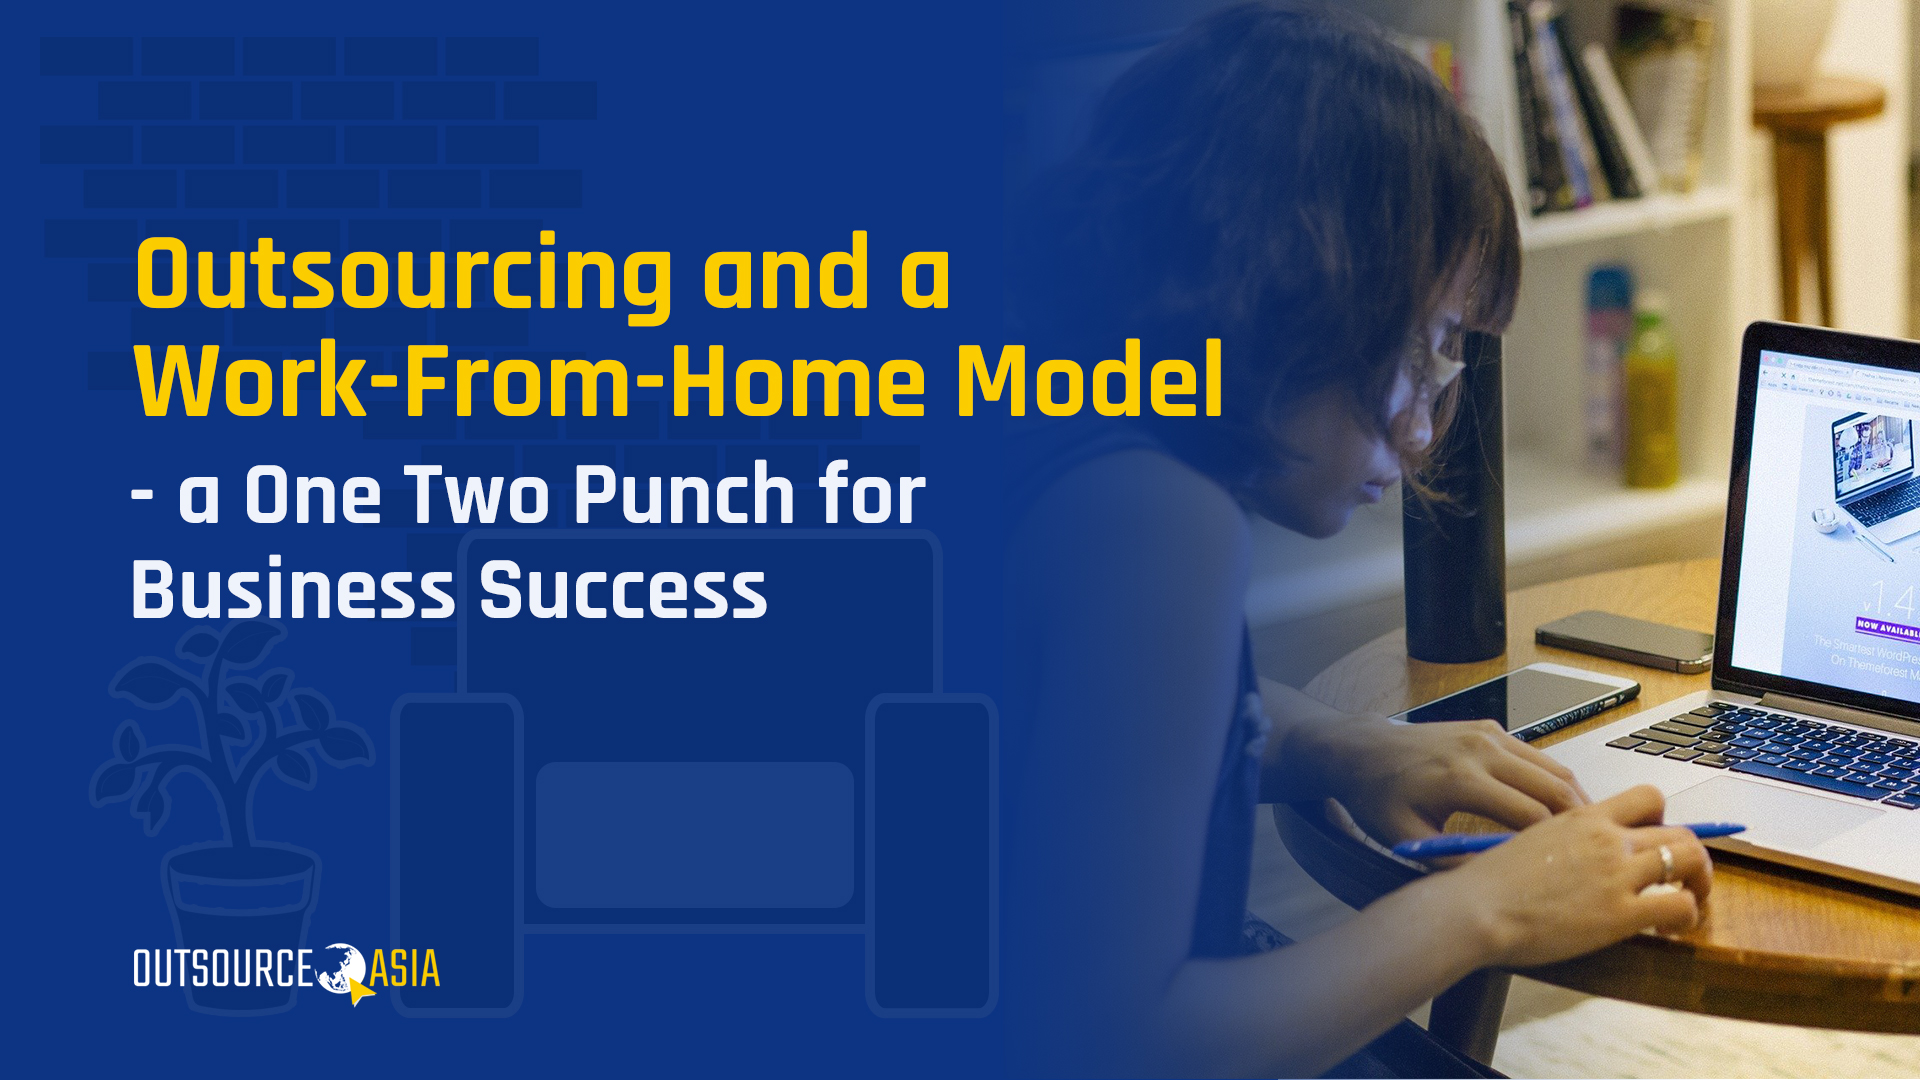 Outsourcing and a Work-From-Home Model